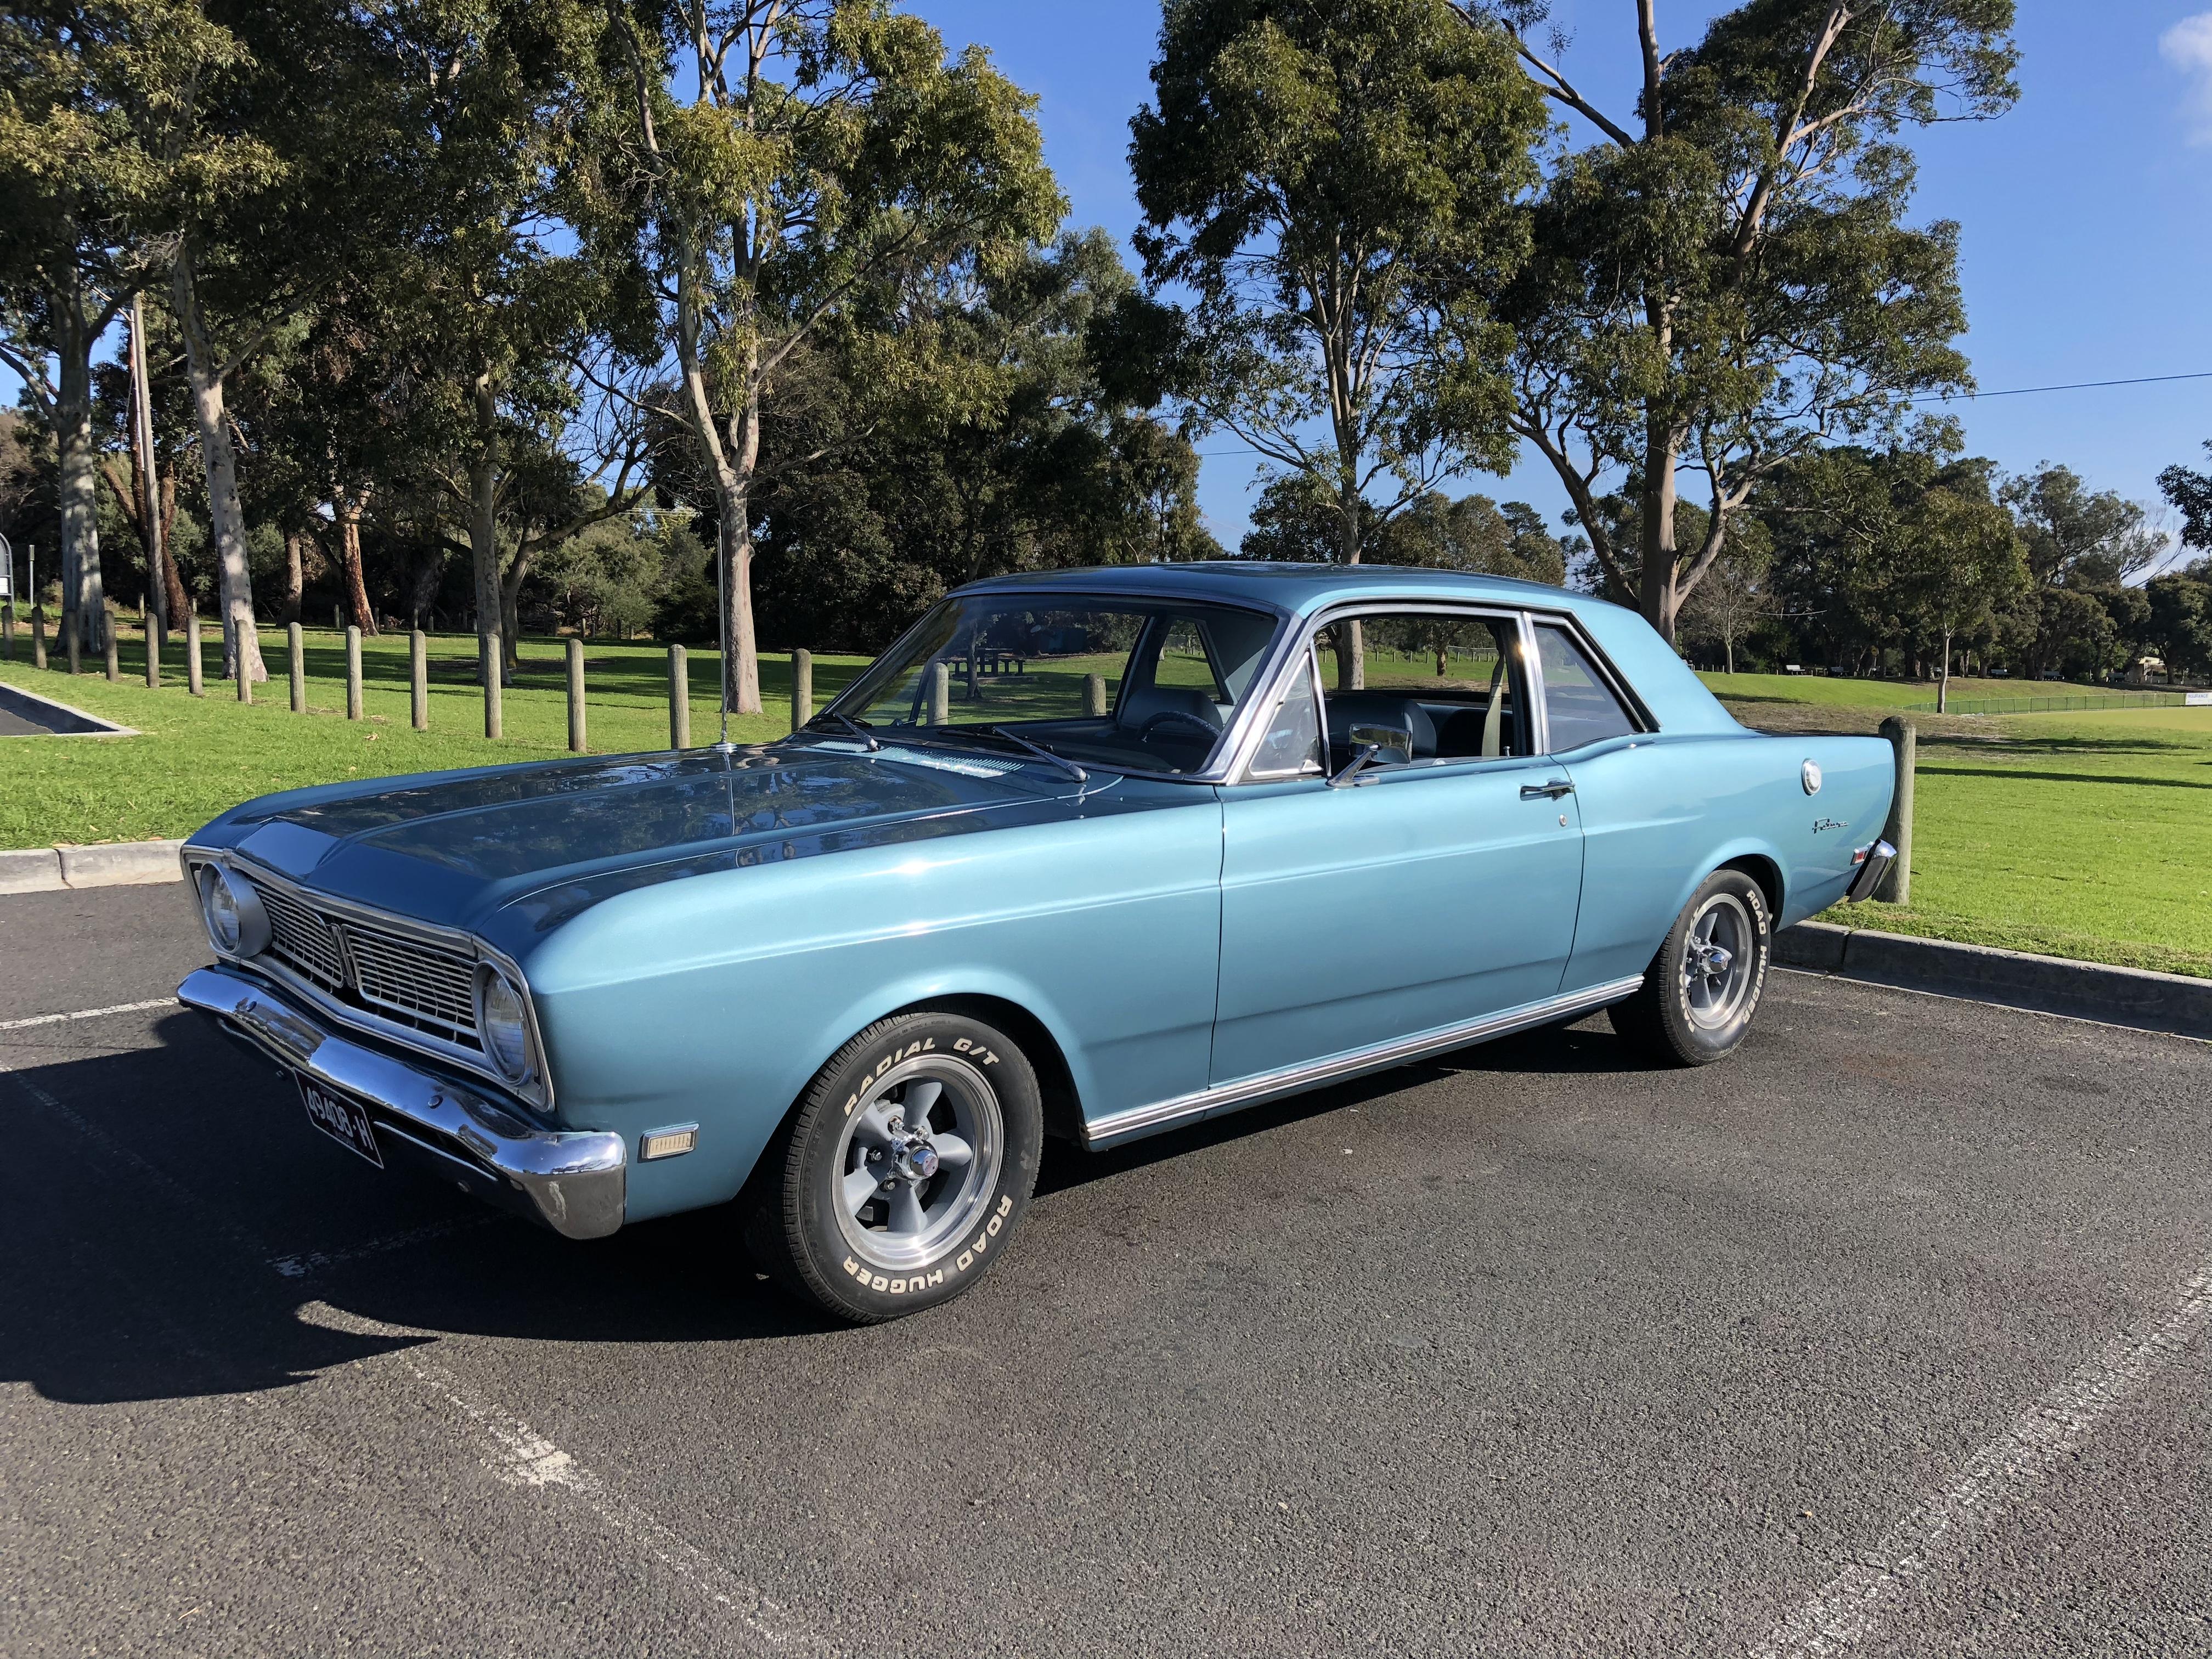 1969 ford falcon futura sports coupe jcw4107447 just cars 1969 ford falcon futura sports coupe